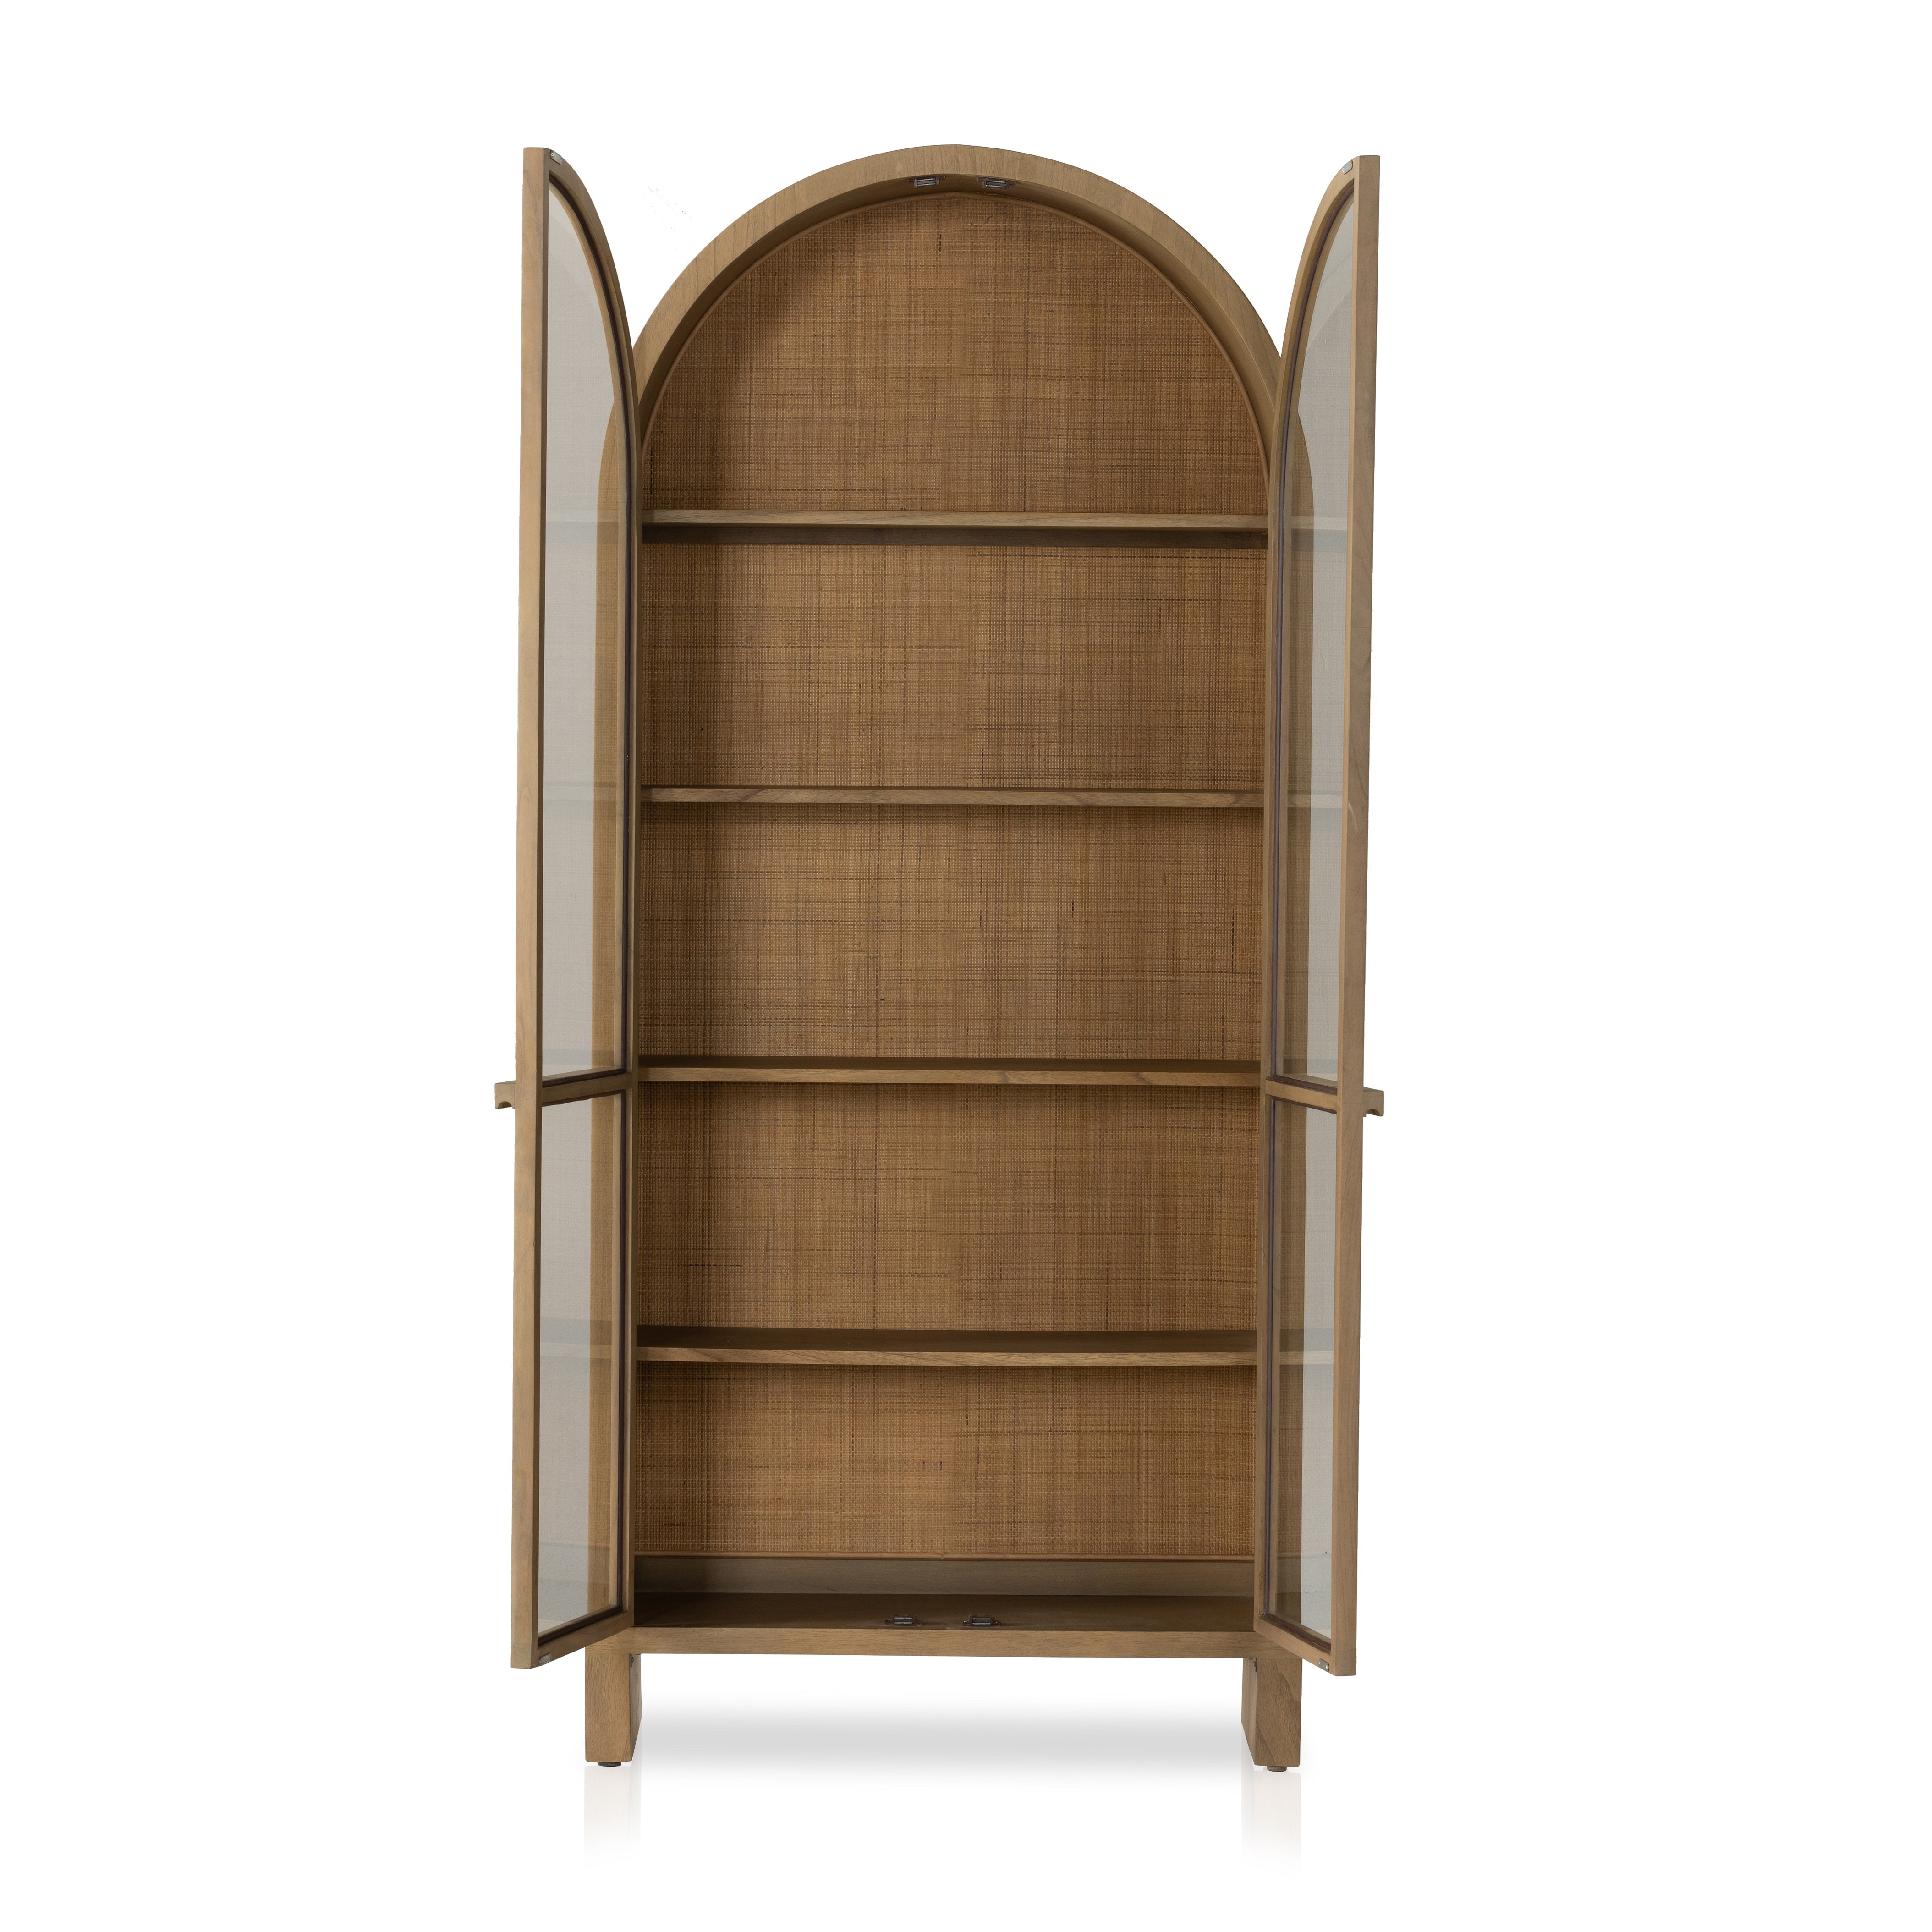 Ilana Burnished Mindi Cabinet forms a dramatic arch this glass-front cabinetry, with woven natural cane backing for a textural finishing touch. Amethyst Home provides interior design services, furniture, rugs, and lighting in the Austin metro area.